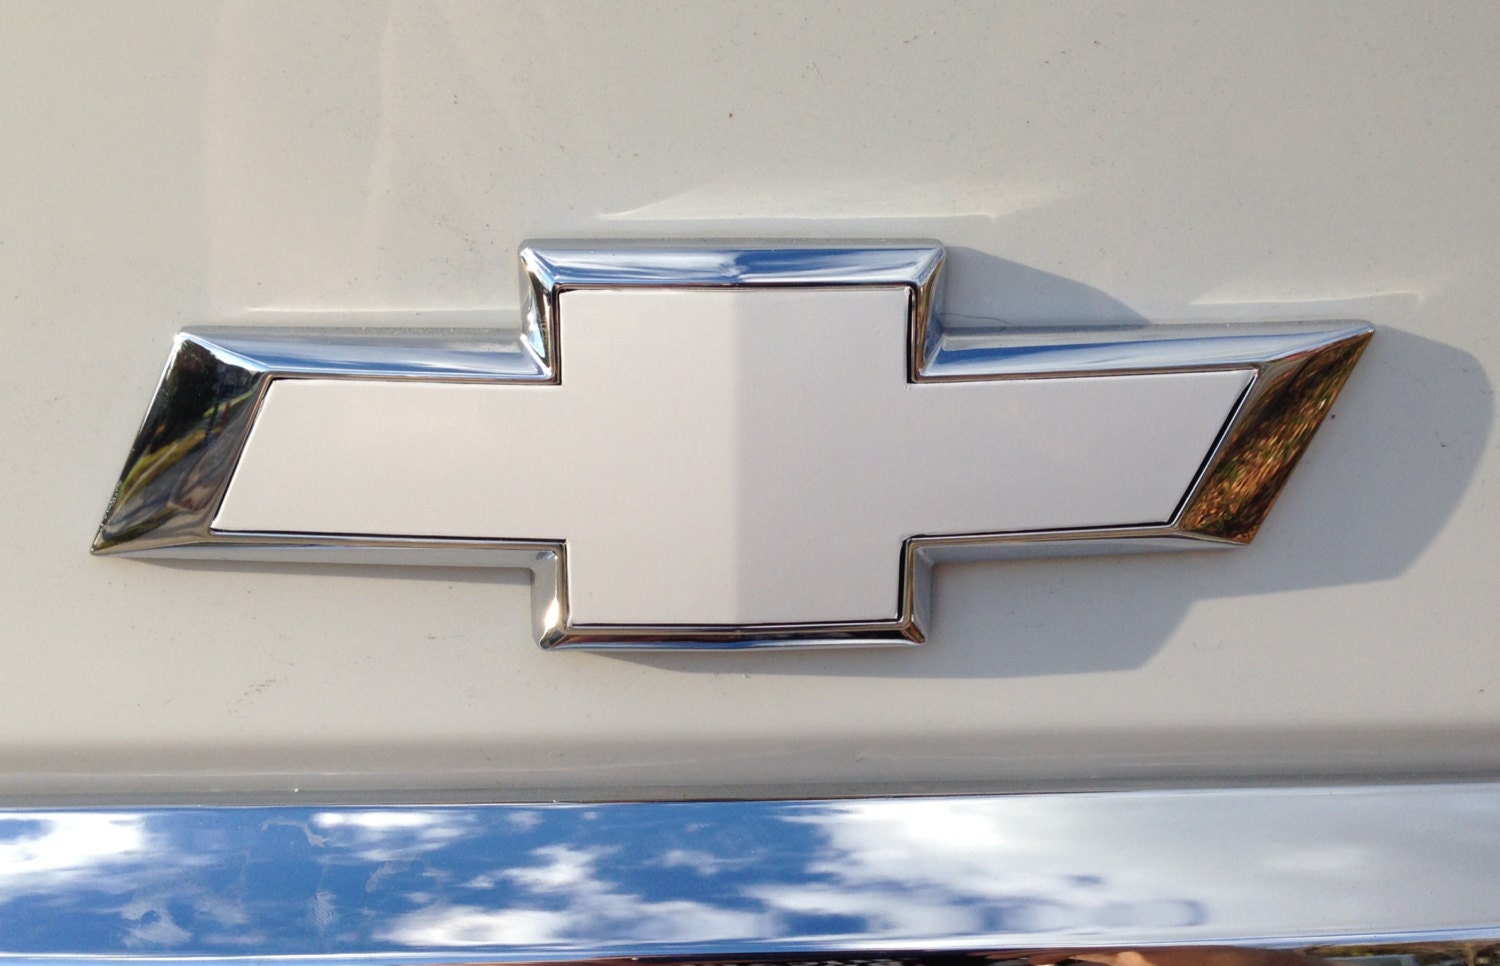 Chevy Bowtie Emblem Overlay Cover Decal 2 Sheets For Both